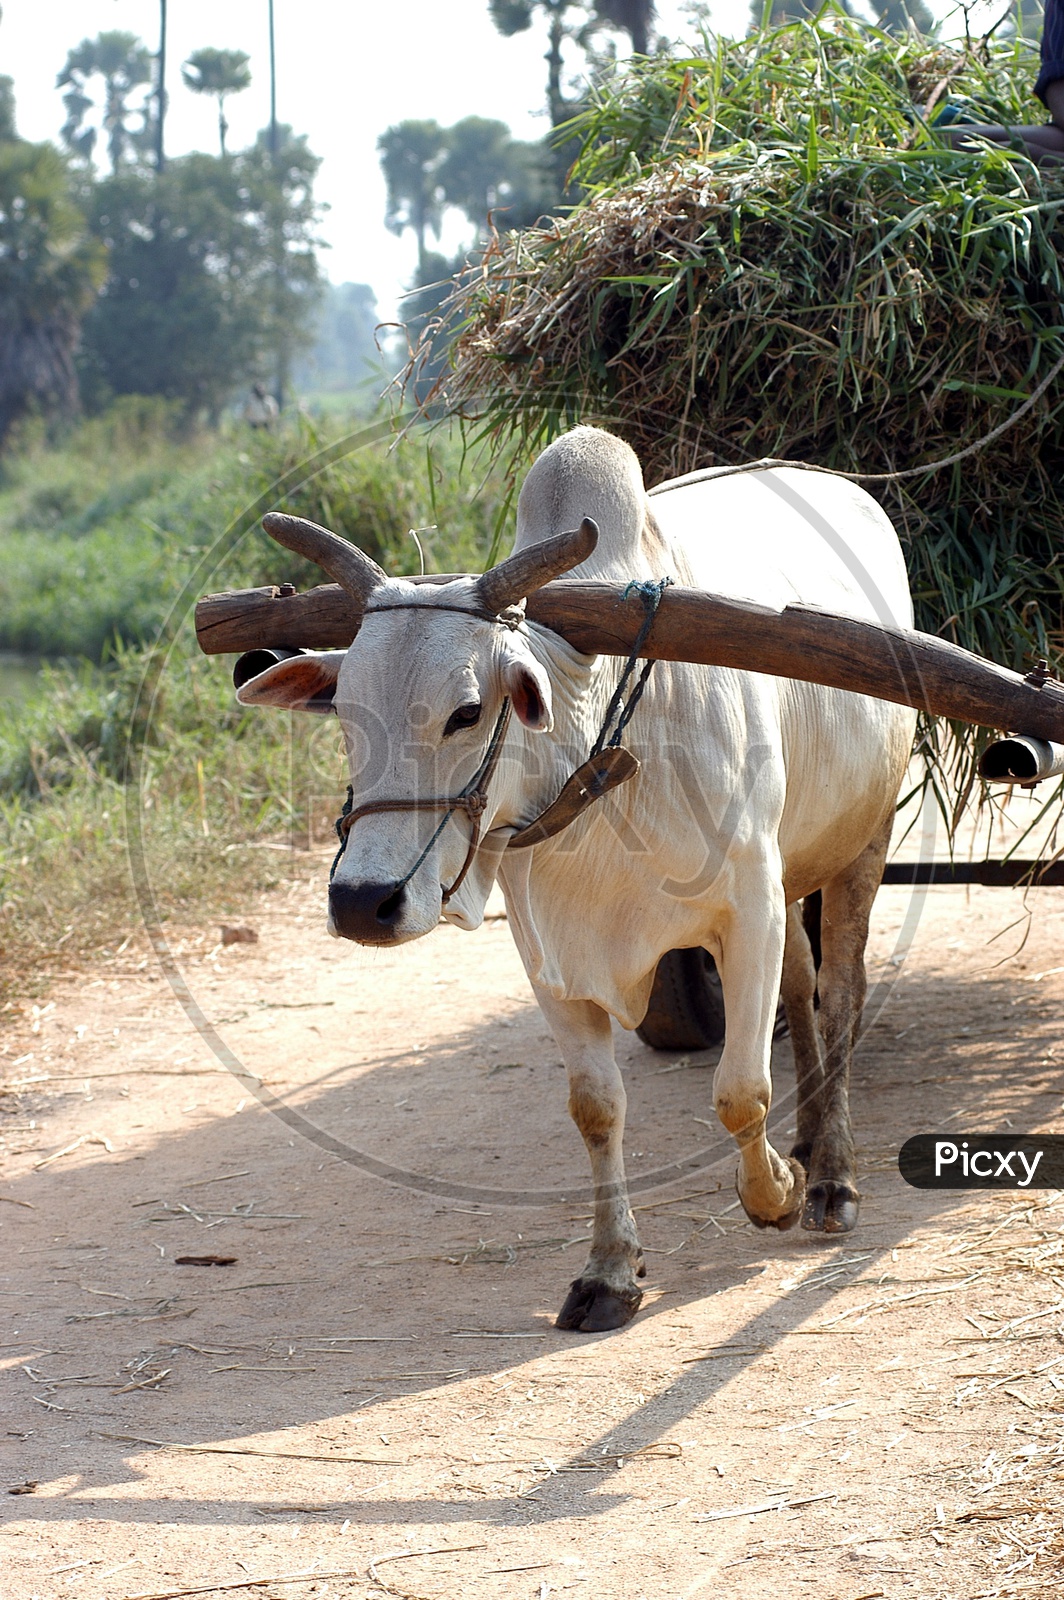 An ox carrying load on a cart